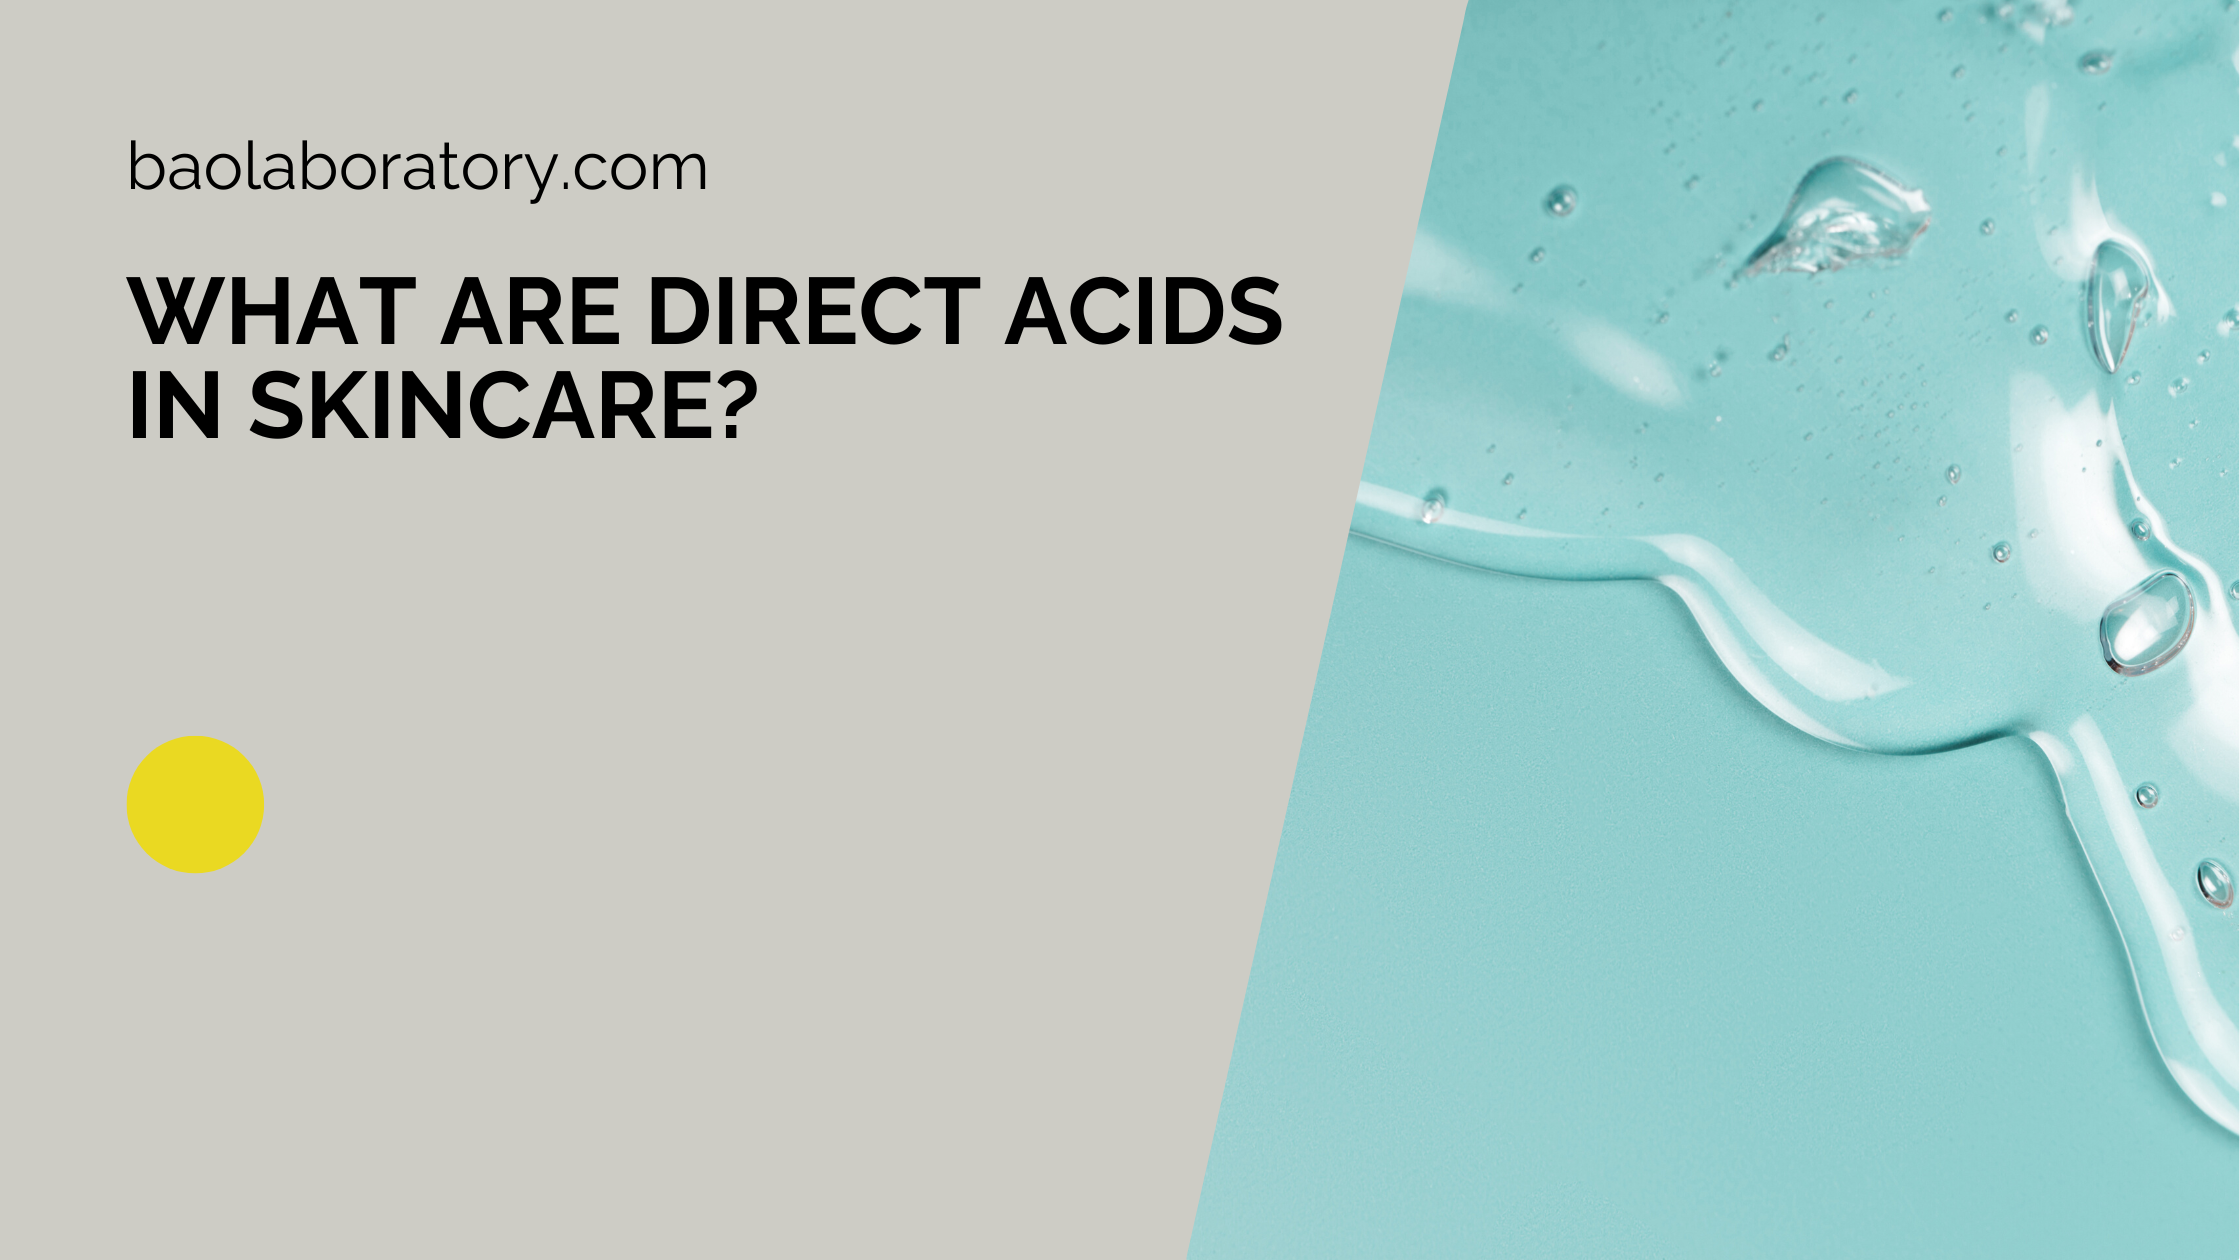 What are direct acids in skincare